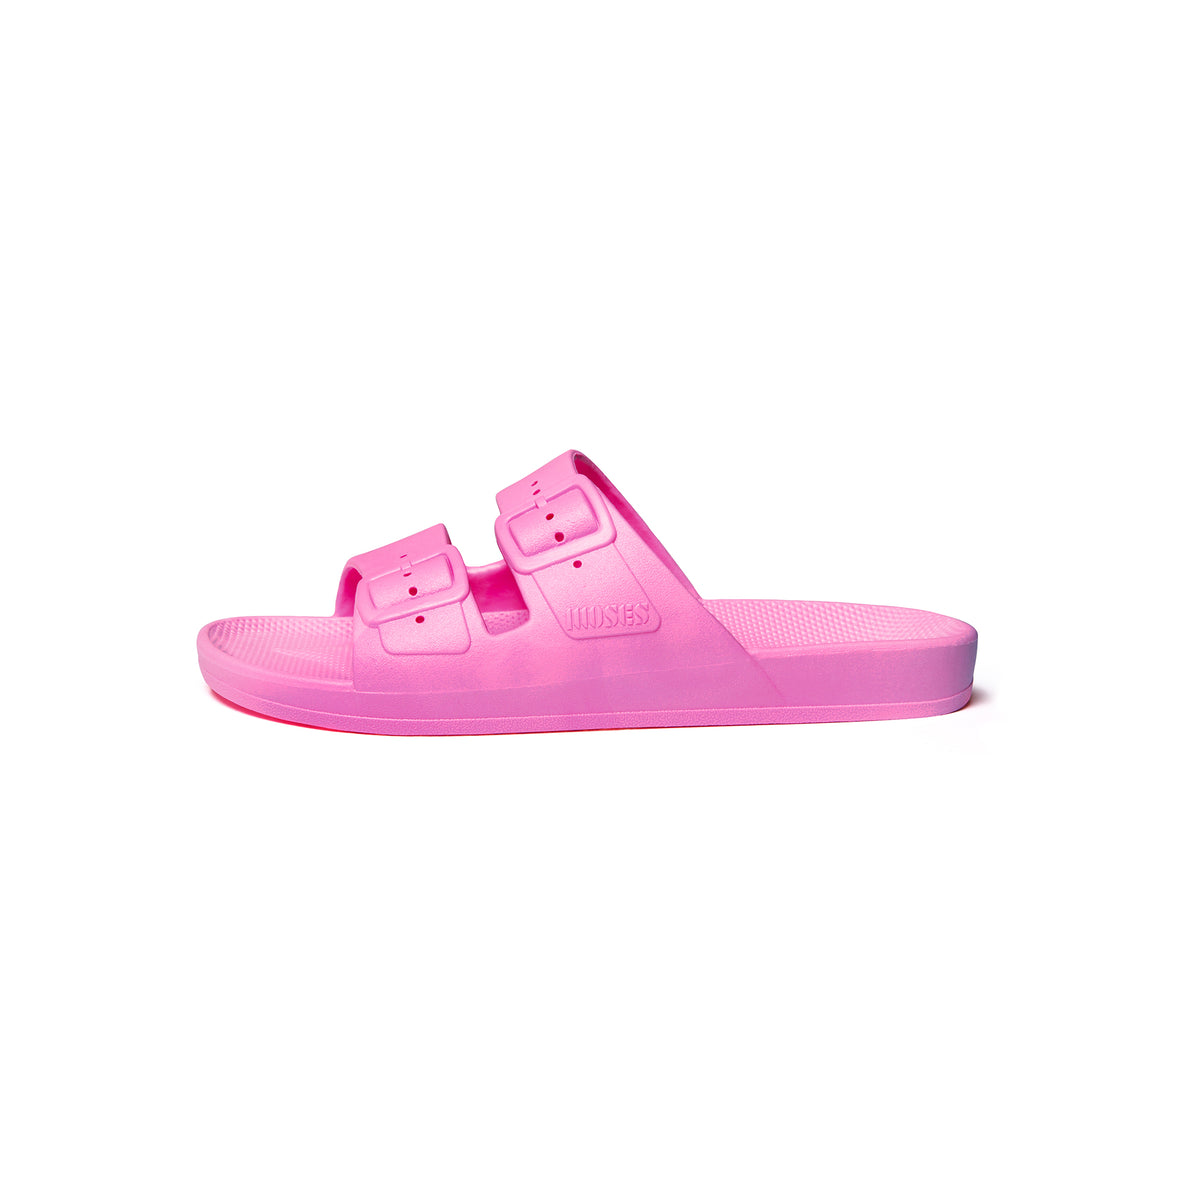 Parallel Culture Shoes and Fashion Online SLIDES FREEDOM MOSES FREEDOM MOSES SOLIDS BUBBLEGUM